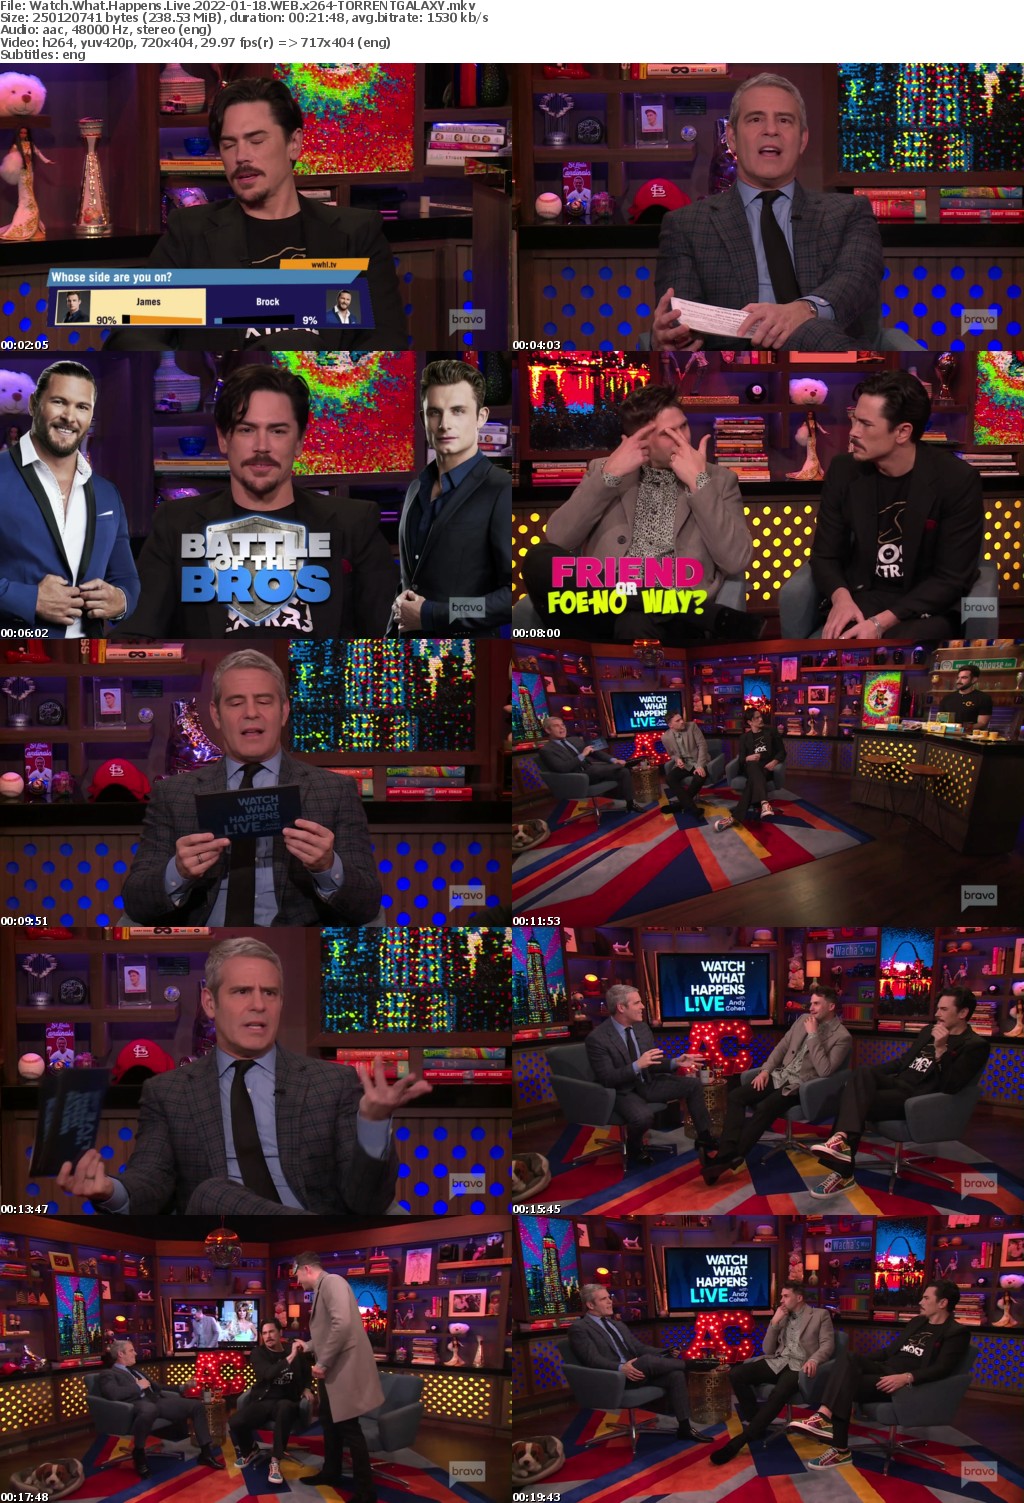 Watch What Happens Live 2022-01-18 WEB x264-GALAXY